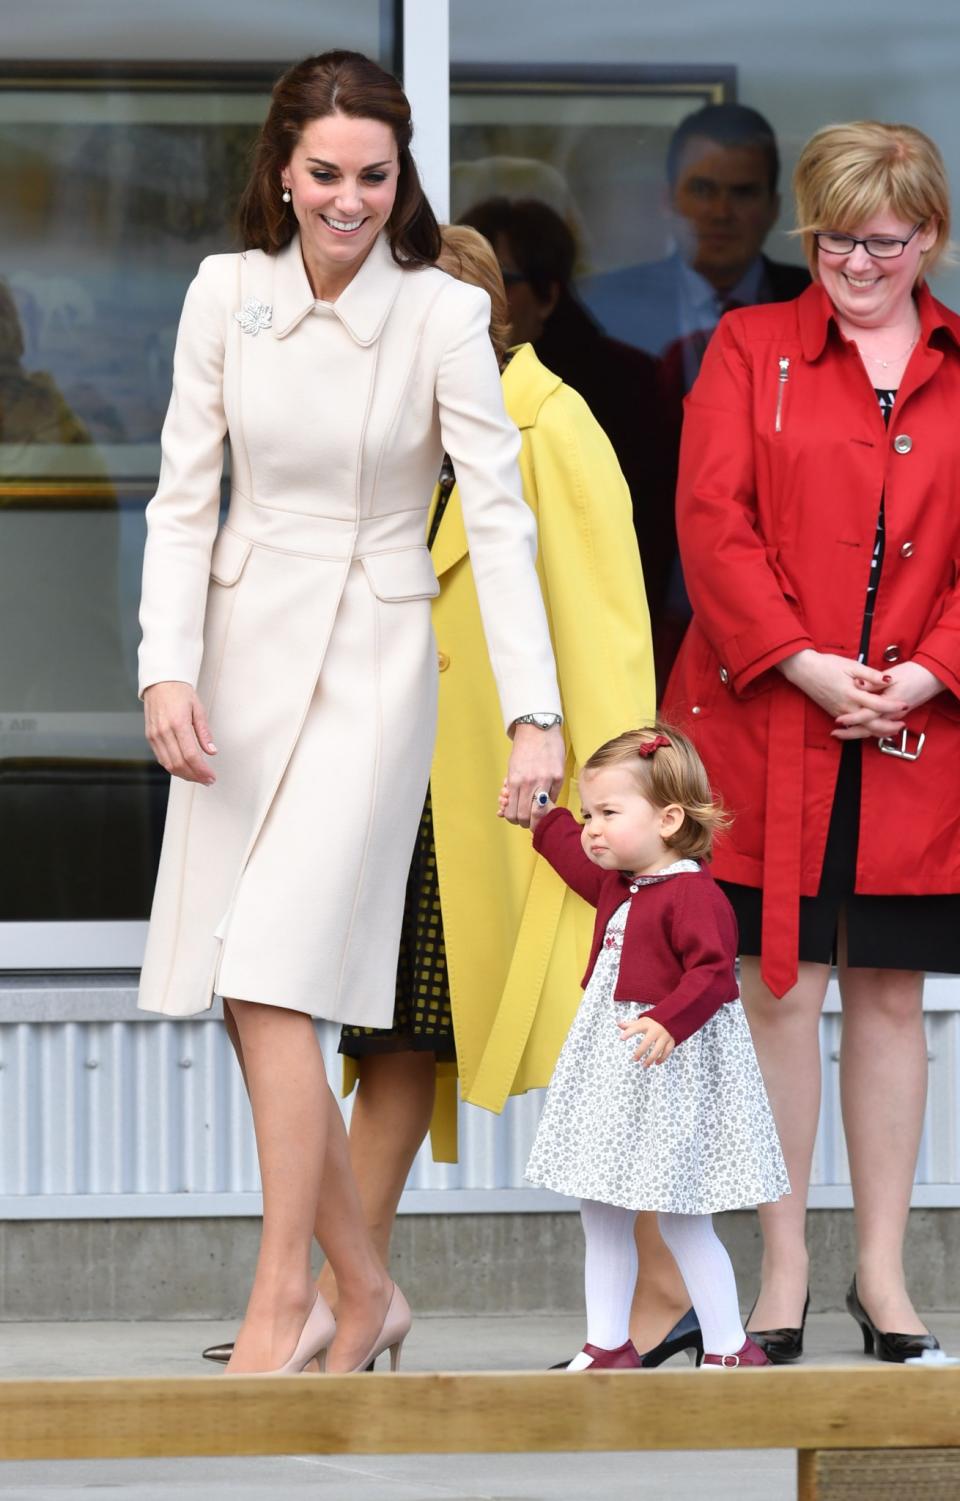 <p>The royal family's tour of Canada saw Kate appear in some memorable looks. This elegant nude coat – complete with a feminine collar and emblematic maple leaf brooch – was the perfect outfit to bid farewell to the country. <i>[Photo: PA]</i> </p>